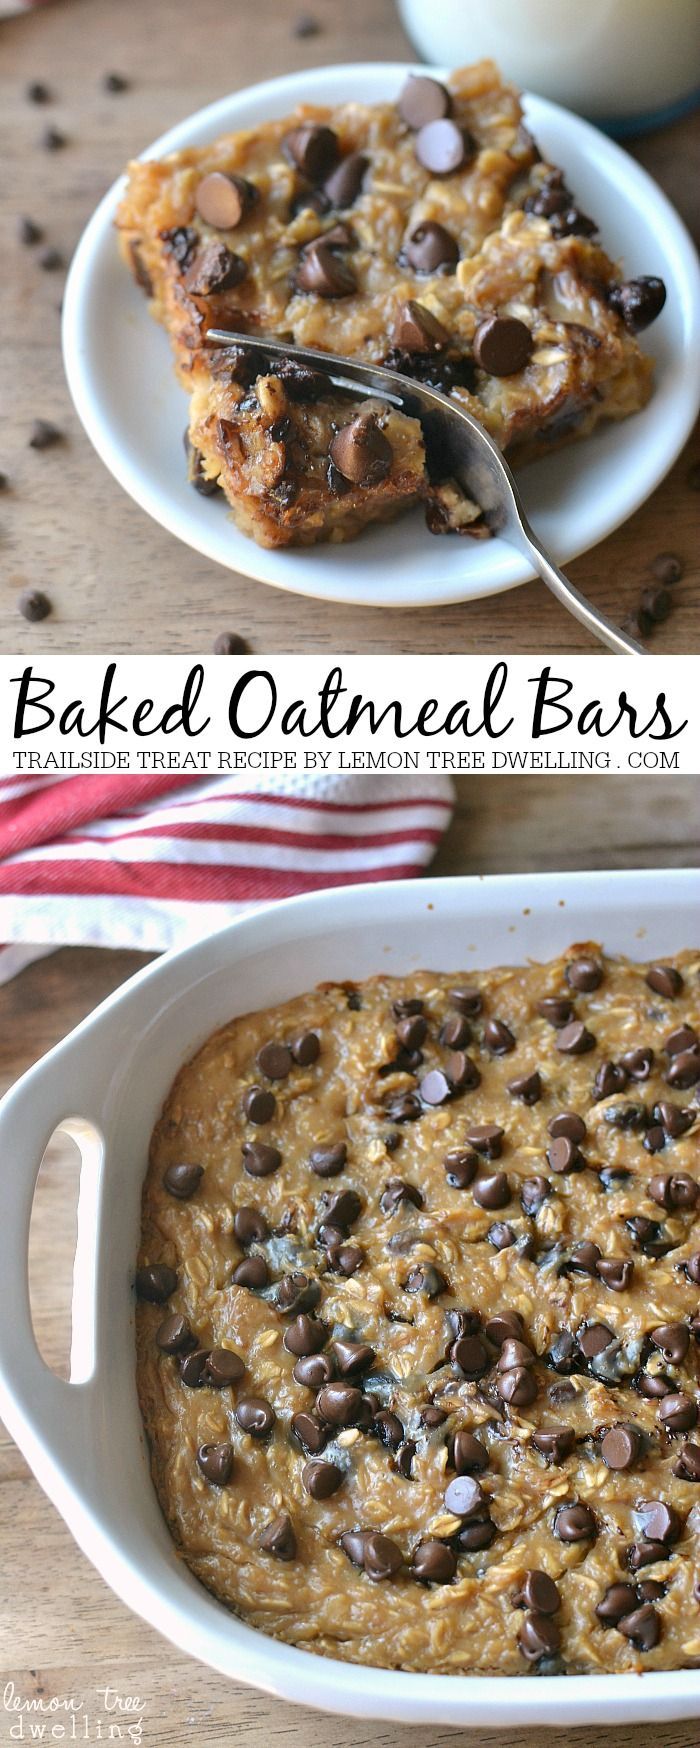 Baked Oatmeal Treat Recipe by lemontreedweeling… these are DELICIOUS!